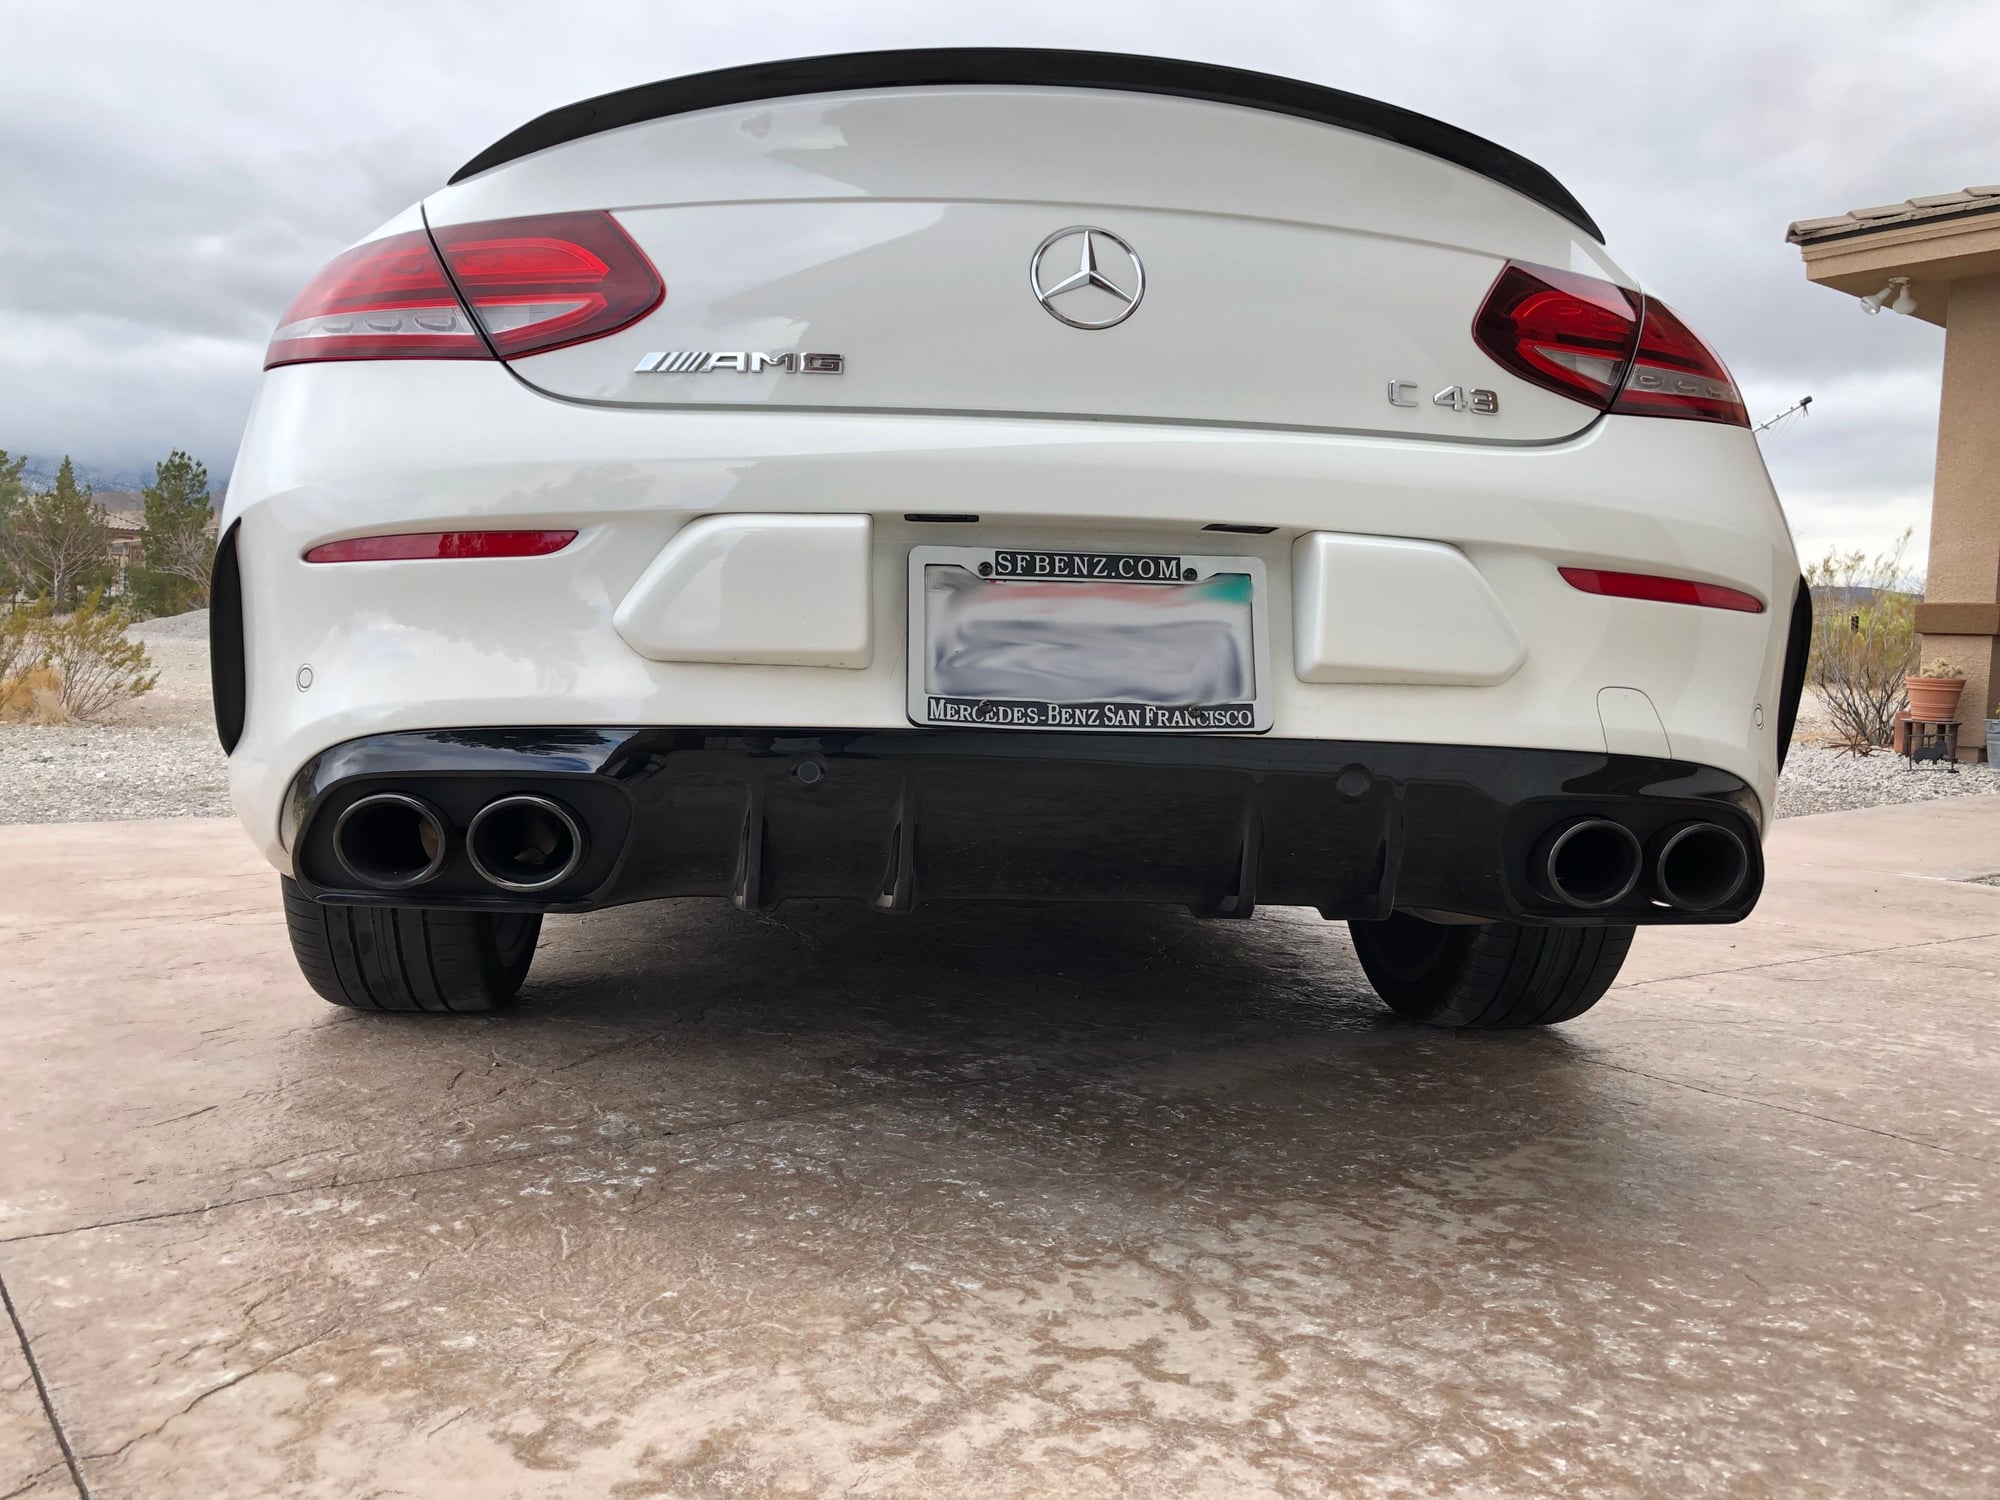 2019 Mercedes-Benz C43 AMG - 2019 C43 Coupe - 22k miles - Used - VIN WDDWJ6EBXKF874625 - 22,000 Miles - 6 cyl - AWD - Automatic - Coupe - White - Sunnyvale, CA 94089, United States